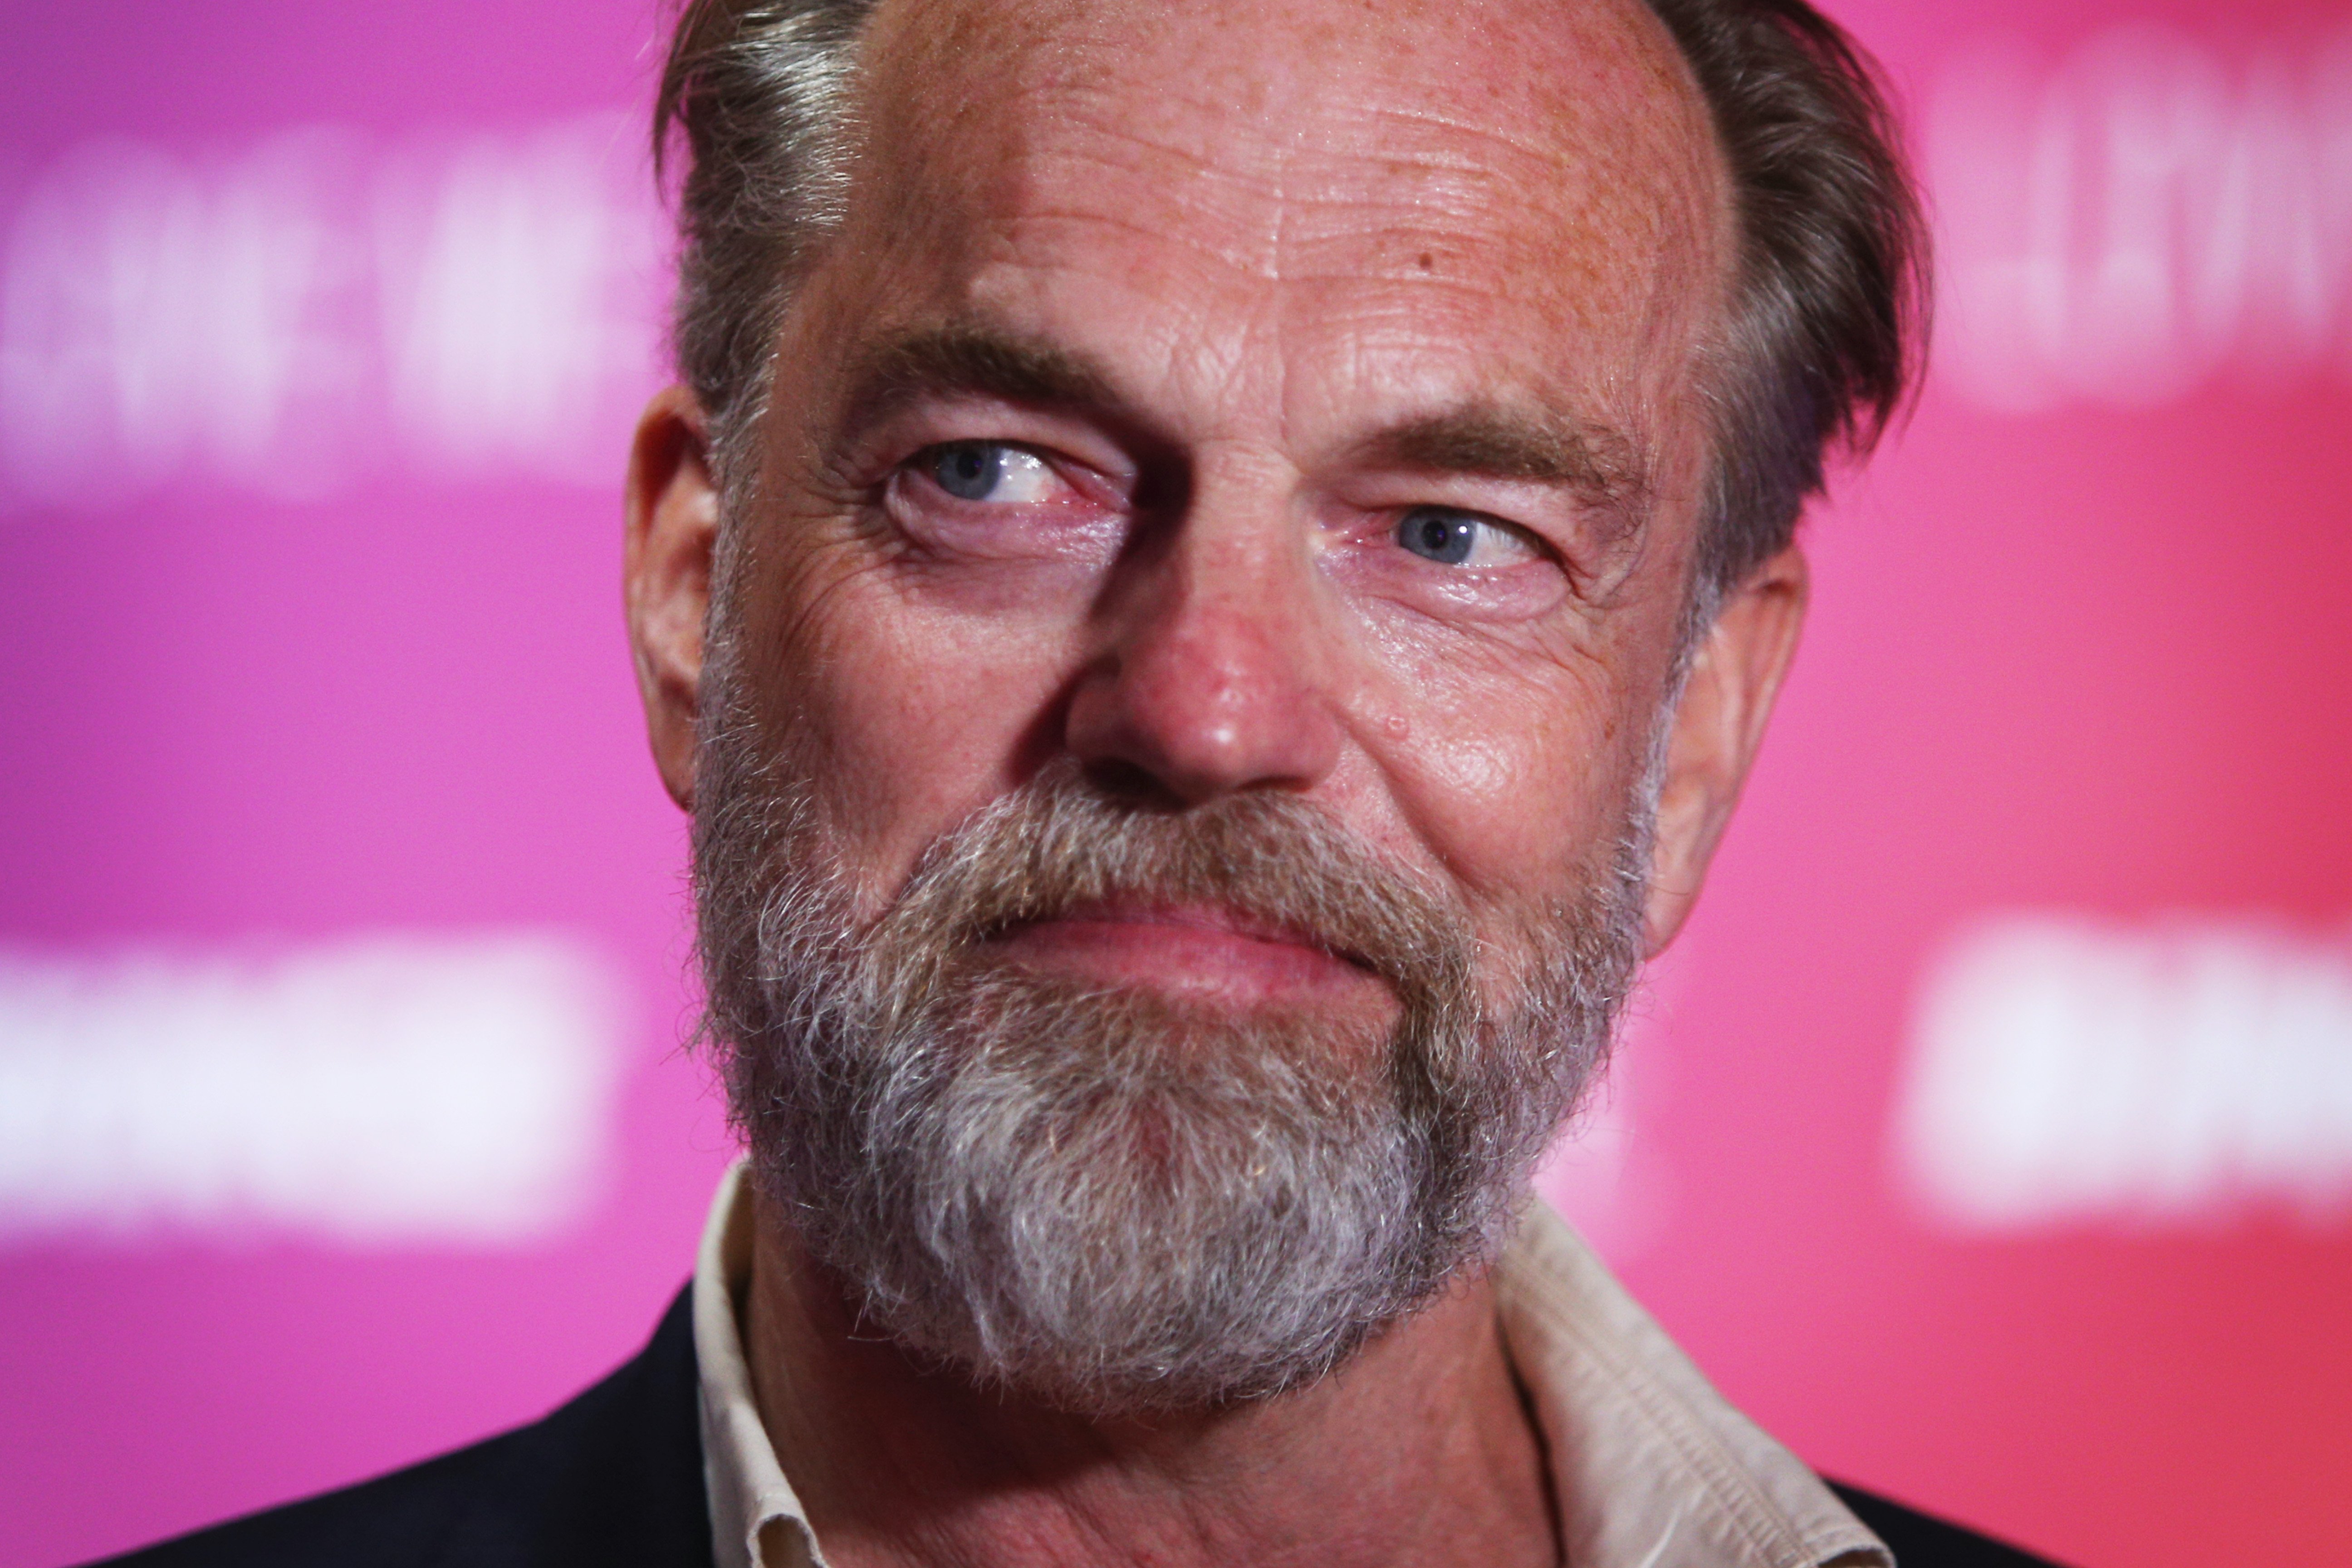 Hugo Weaving at the world premiere of "Love Me" hosted at the State Theatre in Sydney, Australia on December 09, 2021 | Source: Getty Images